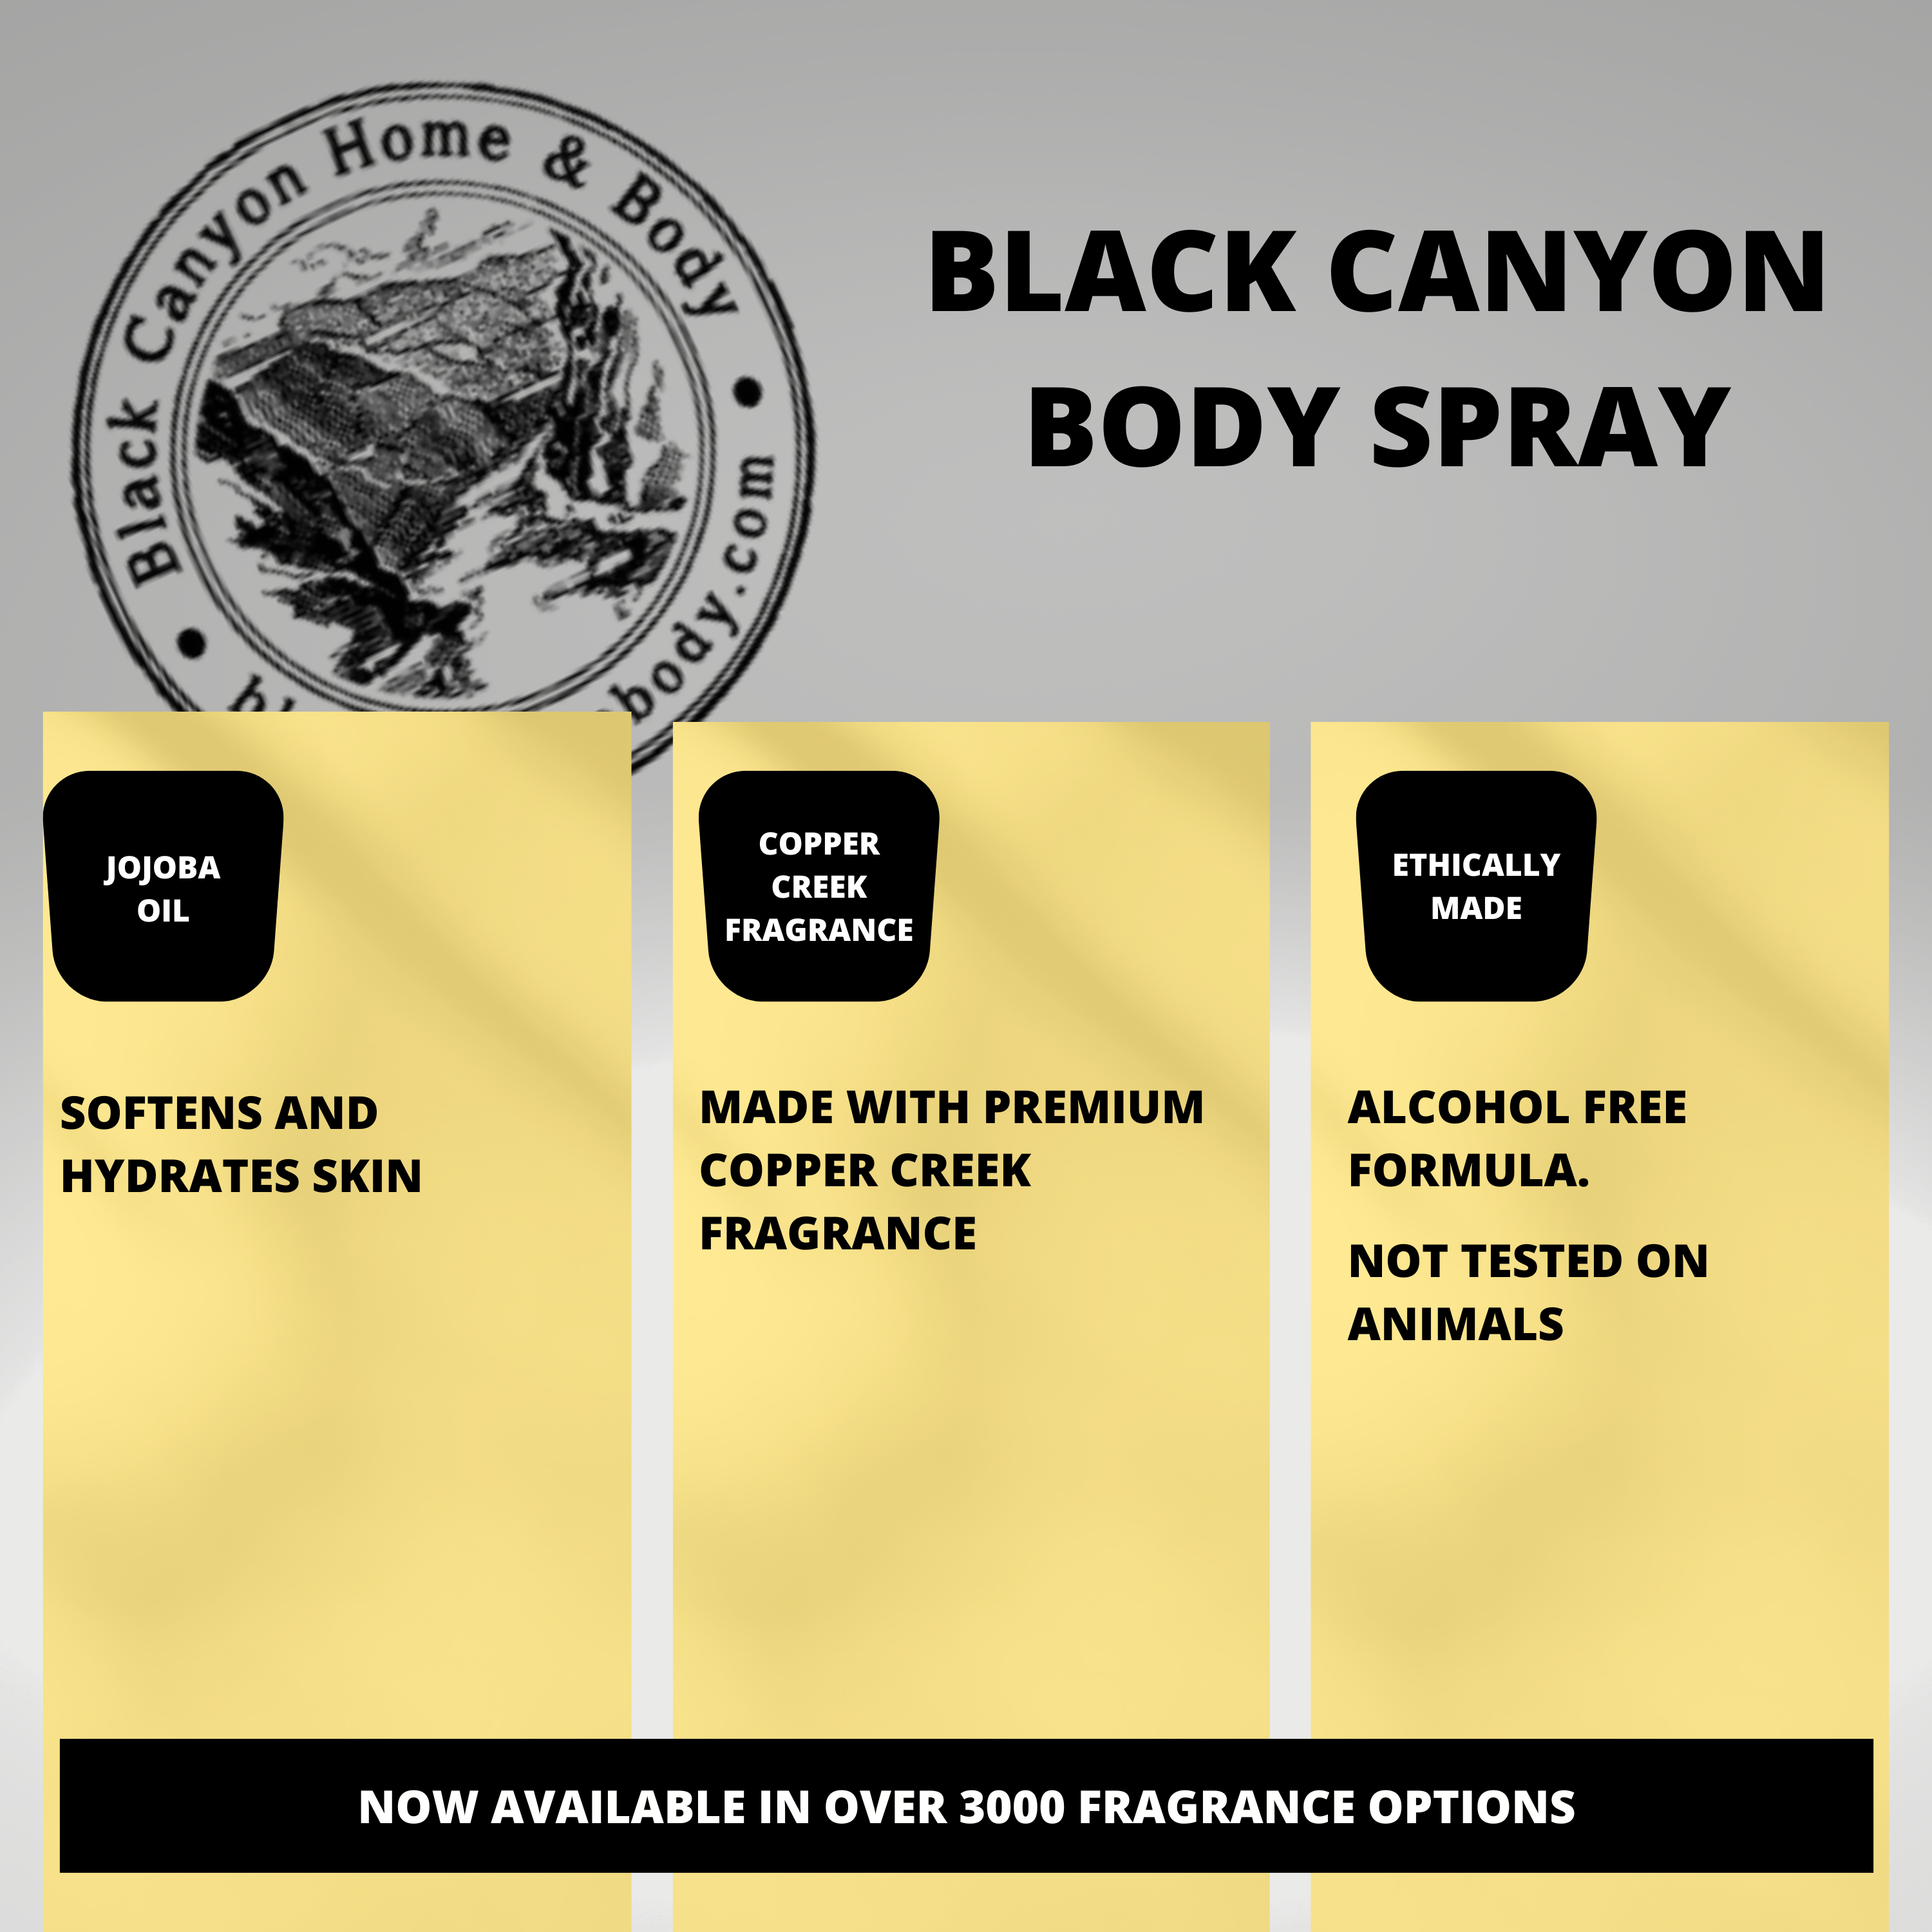 Black Canyon Cotton Candy Scented Body Spray